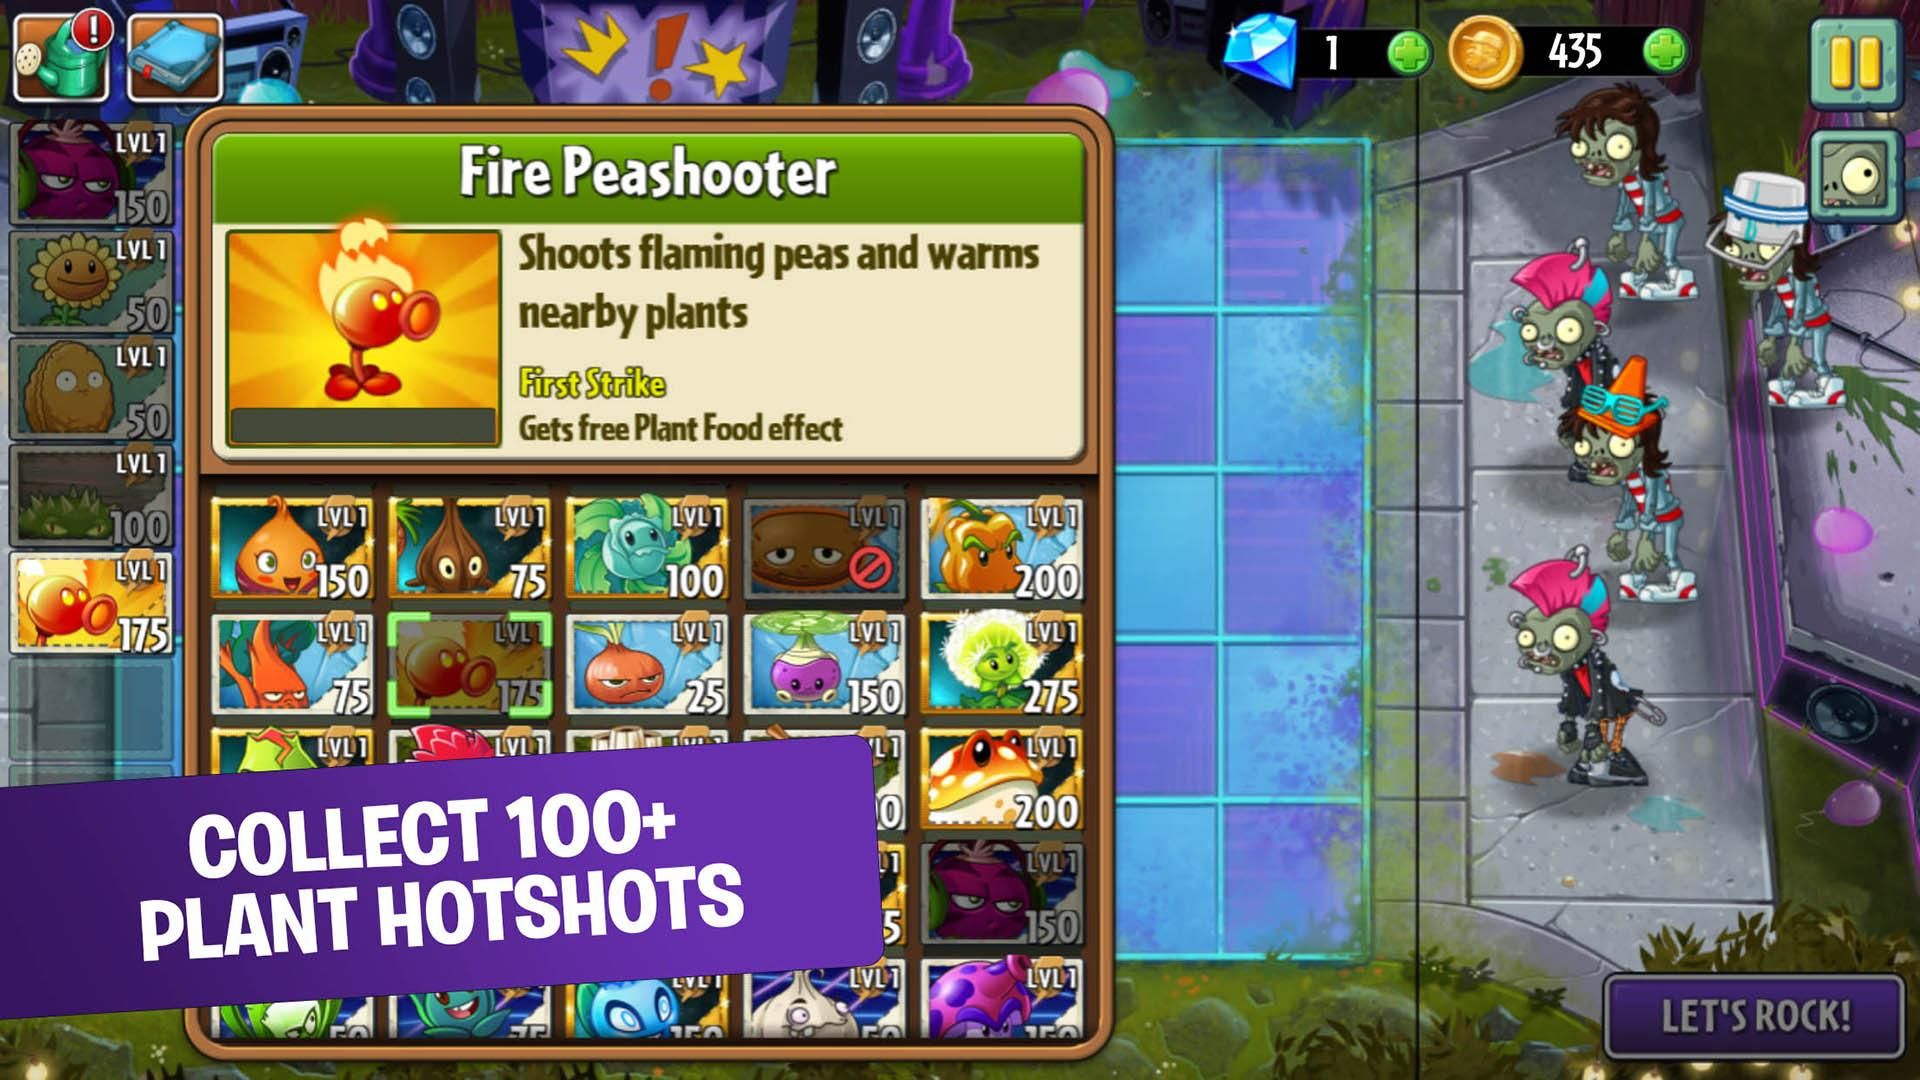 Collect more than 100 plant hotshots in Plants vs Zombies 2